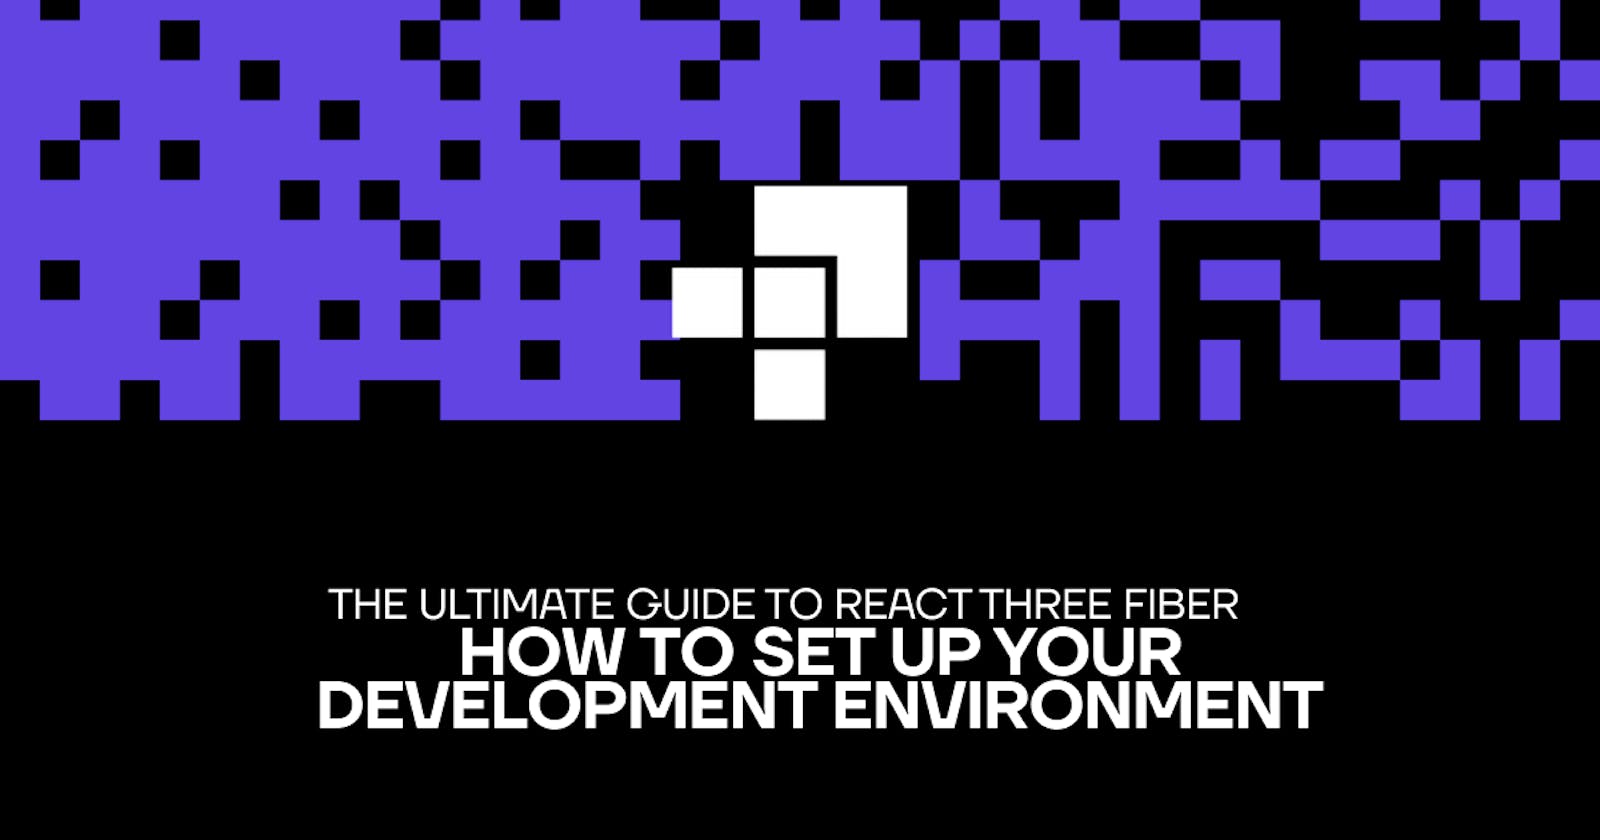 The Ultimate Guide to React Three Fiber: How to Set Up Your Development Environment